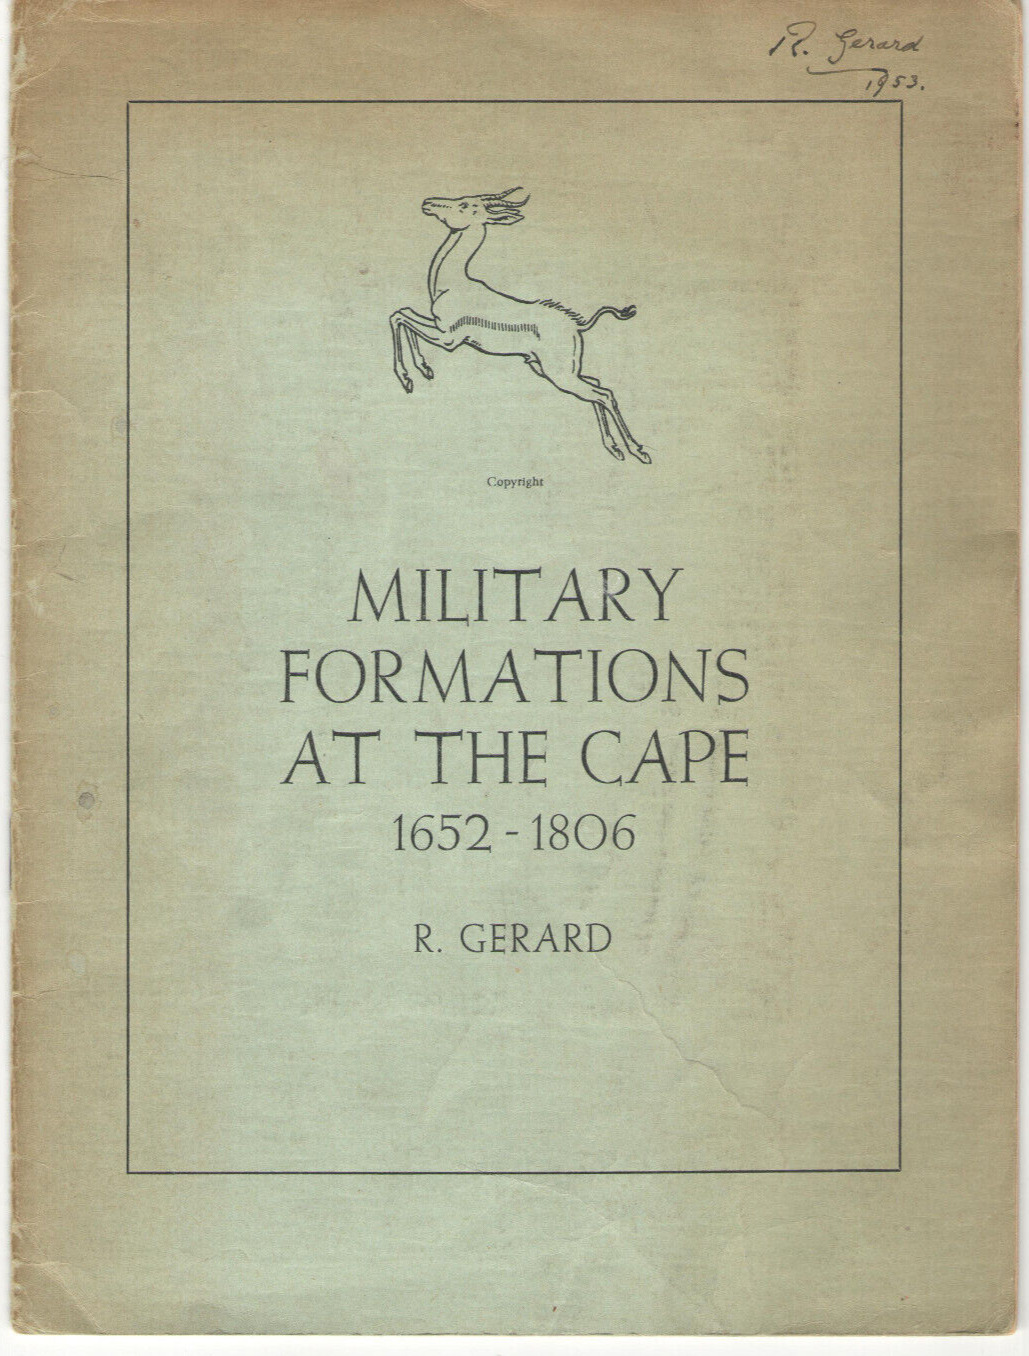 VTG 1953 BOOK 'MILITARY FORMATIONS AT THE CAPE 1652-1806' DUTCH EAST INDIA CO